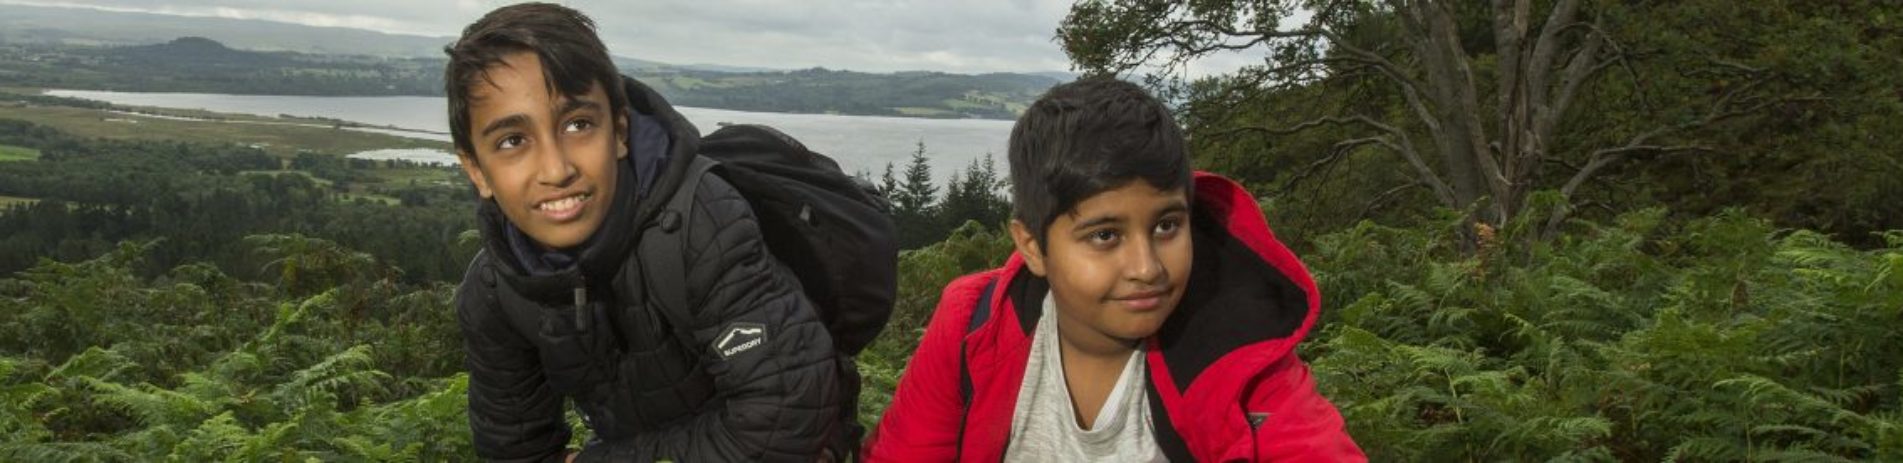 two-young-boys-smiling-surrounded-by-bracken-loch-lomond-visible-in-the-distance